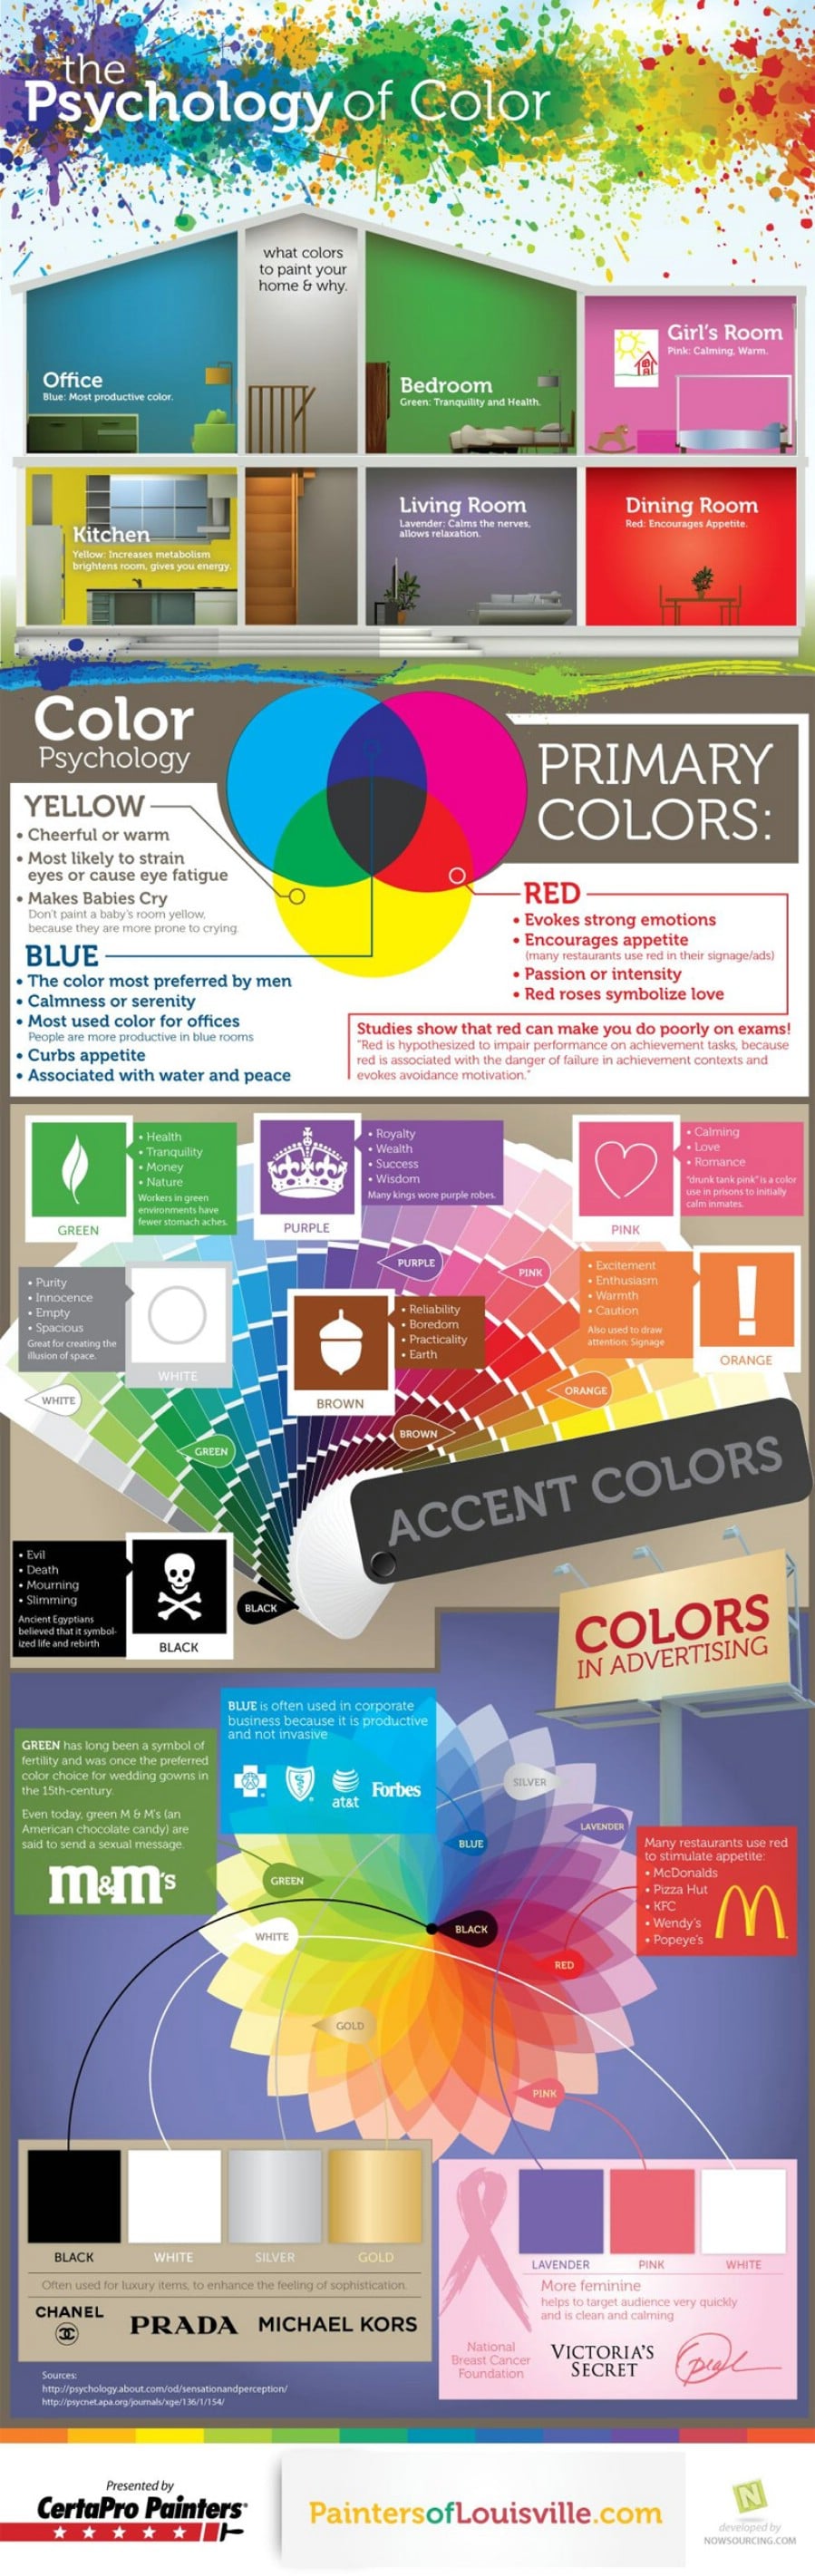 23. Discover color psychology - 50 Amazingly Clever Cheat Sheets To Simplify Home Decorating Projects